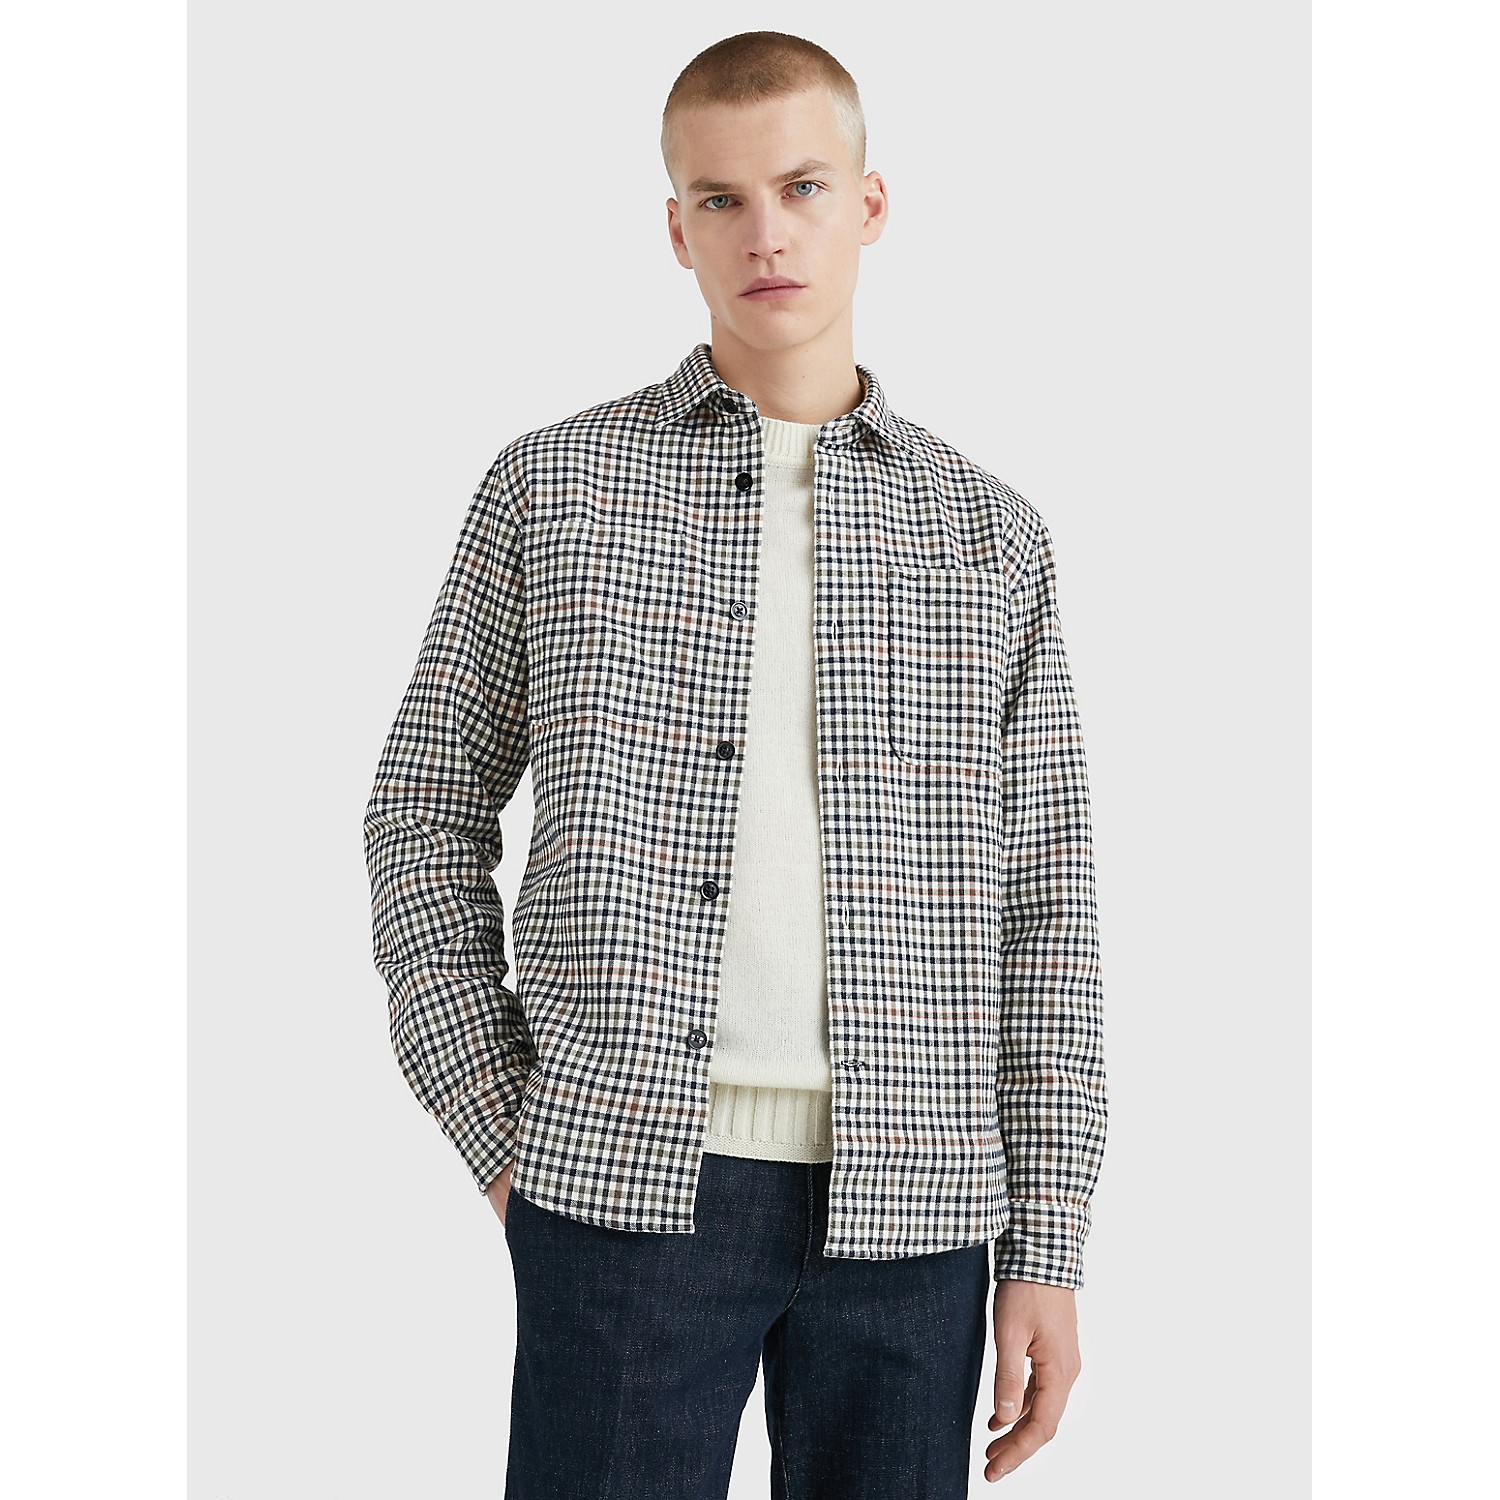 TOMMY HILFIGER Relaxed Fit Tattersall Overshirt